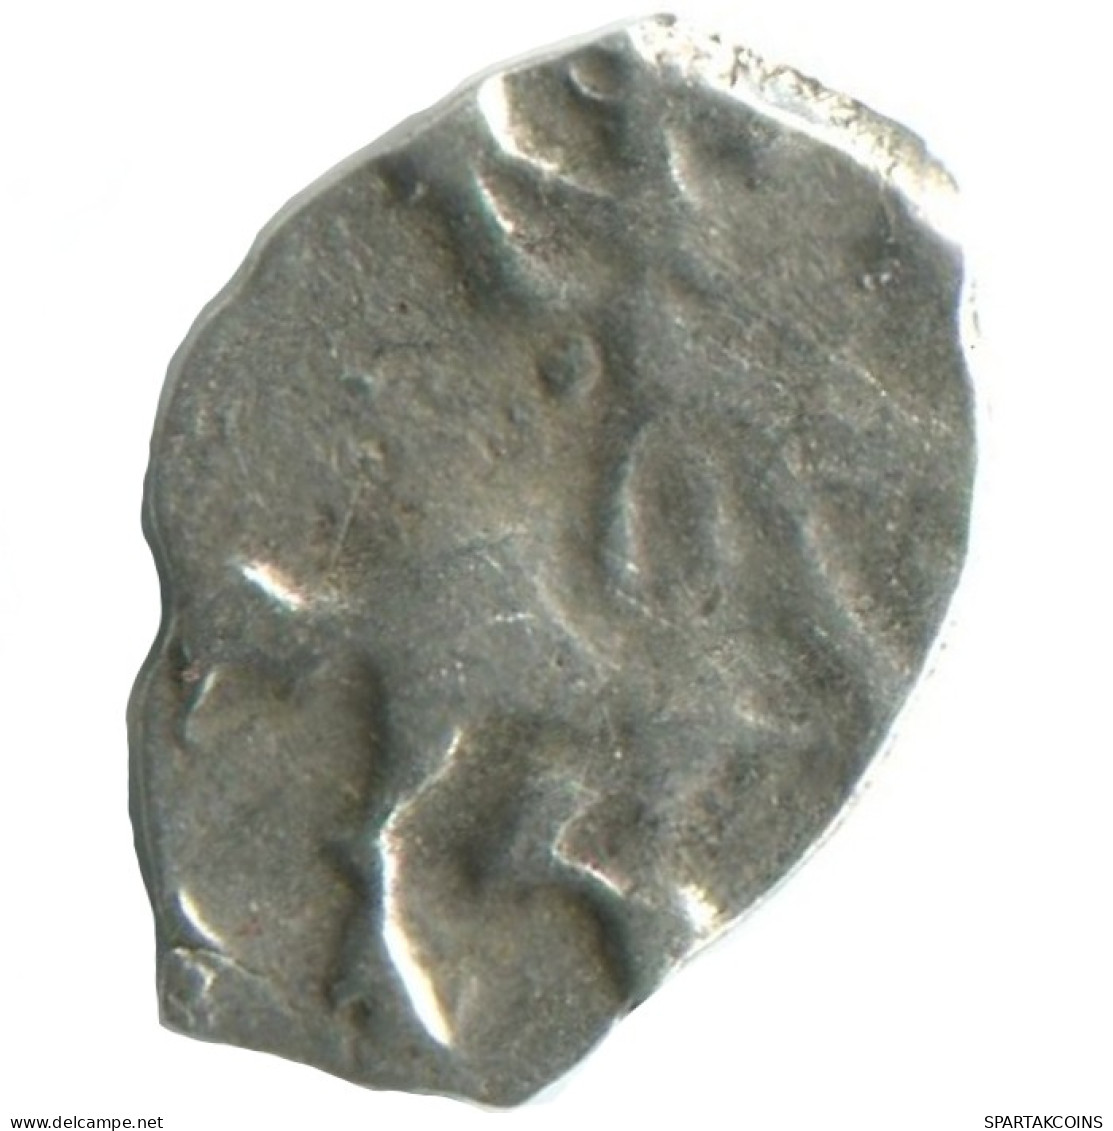 RUSSIE RUSSIA 1696 KOPECK PETER I KADASHEVSKY Mint MOSCOW ARGENT 0.3g/8mm #AB560.10.F.A - Rusia